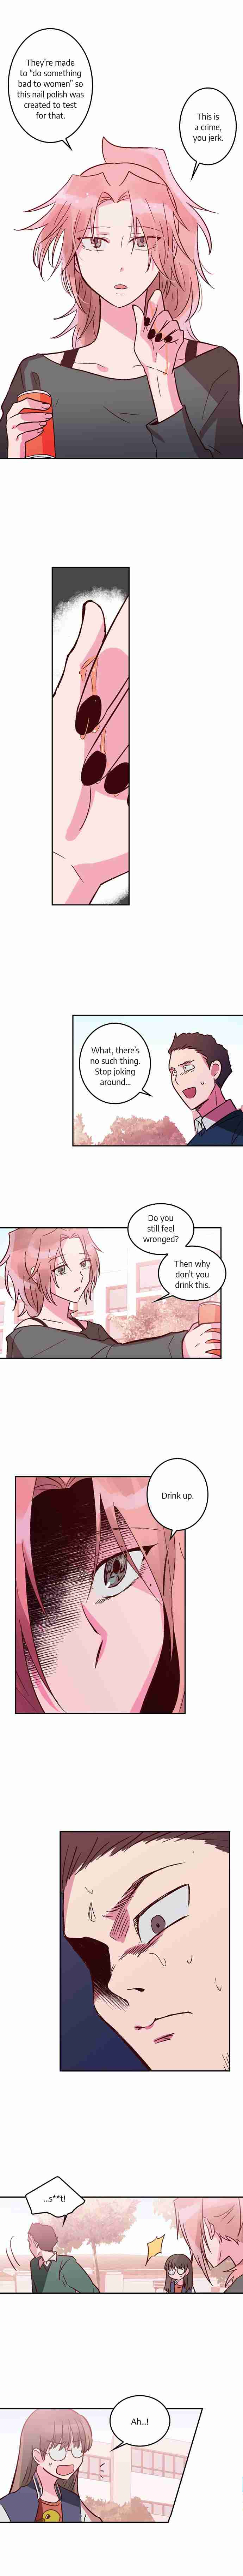 The Man Who Cleans Up Makeup Ch. 8